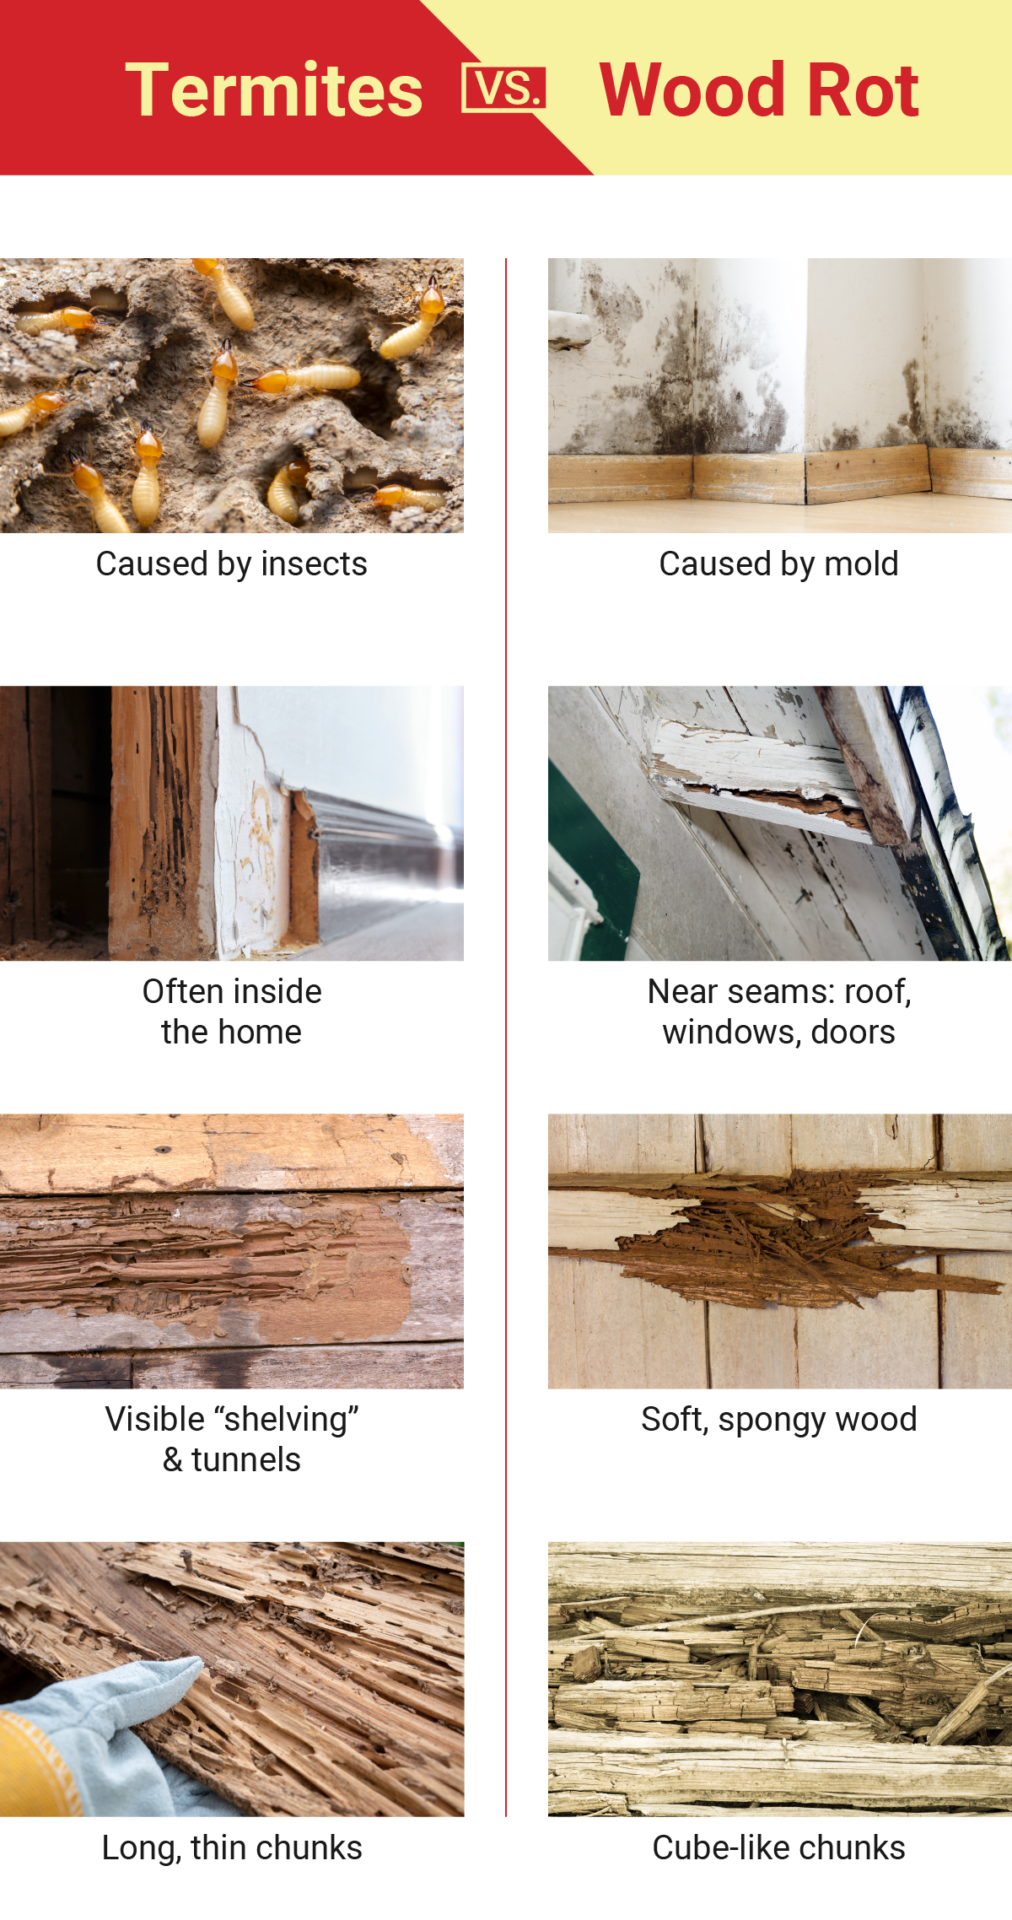 side-by-side comparison of termite damage vs. wood rot